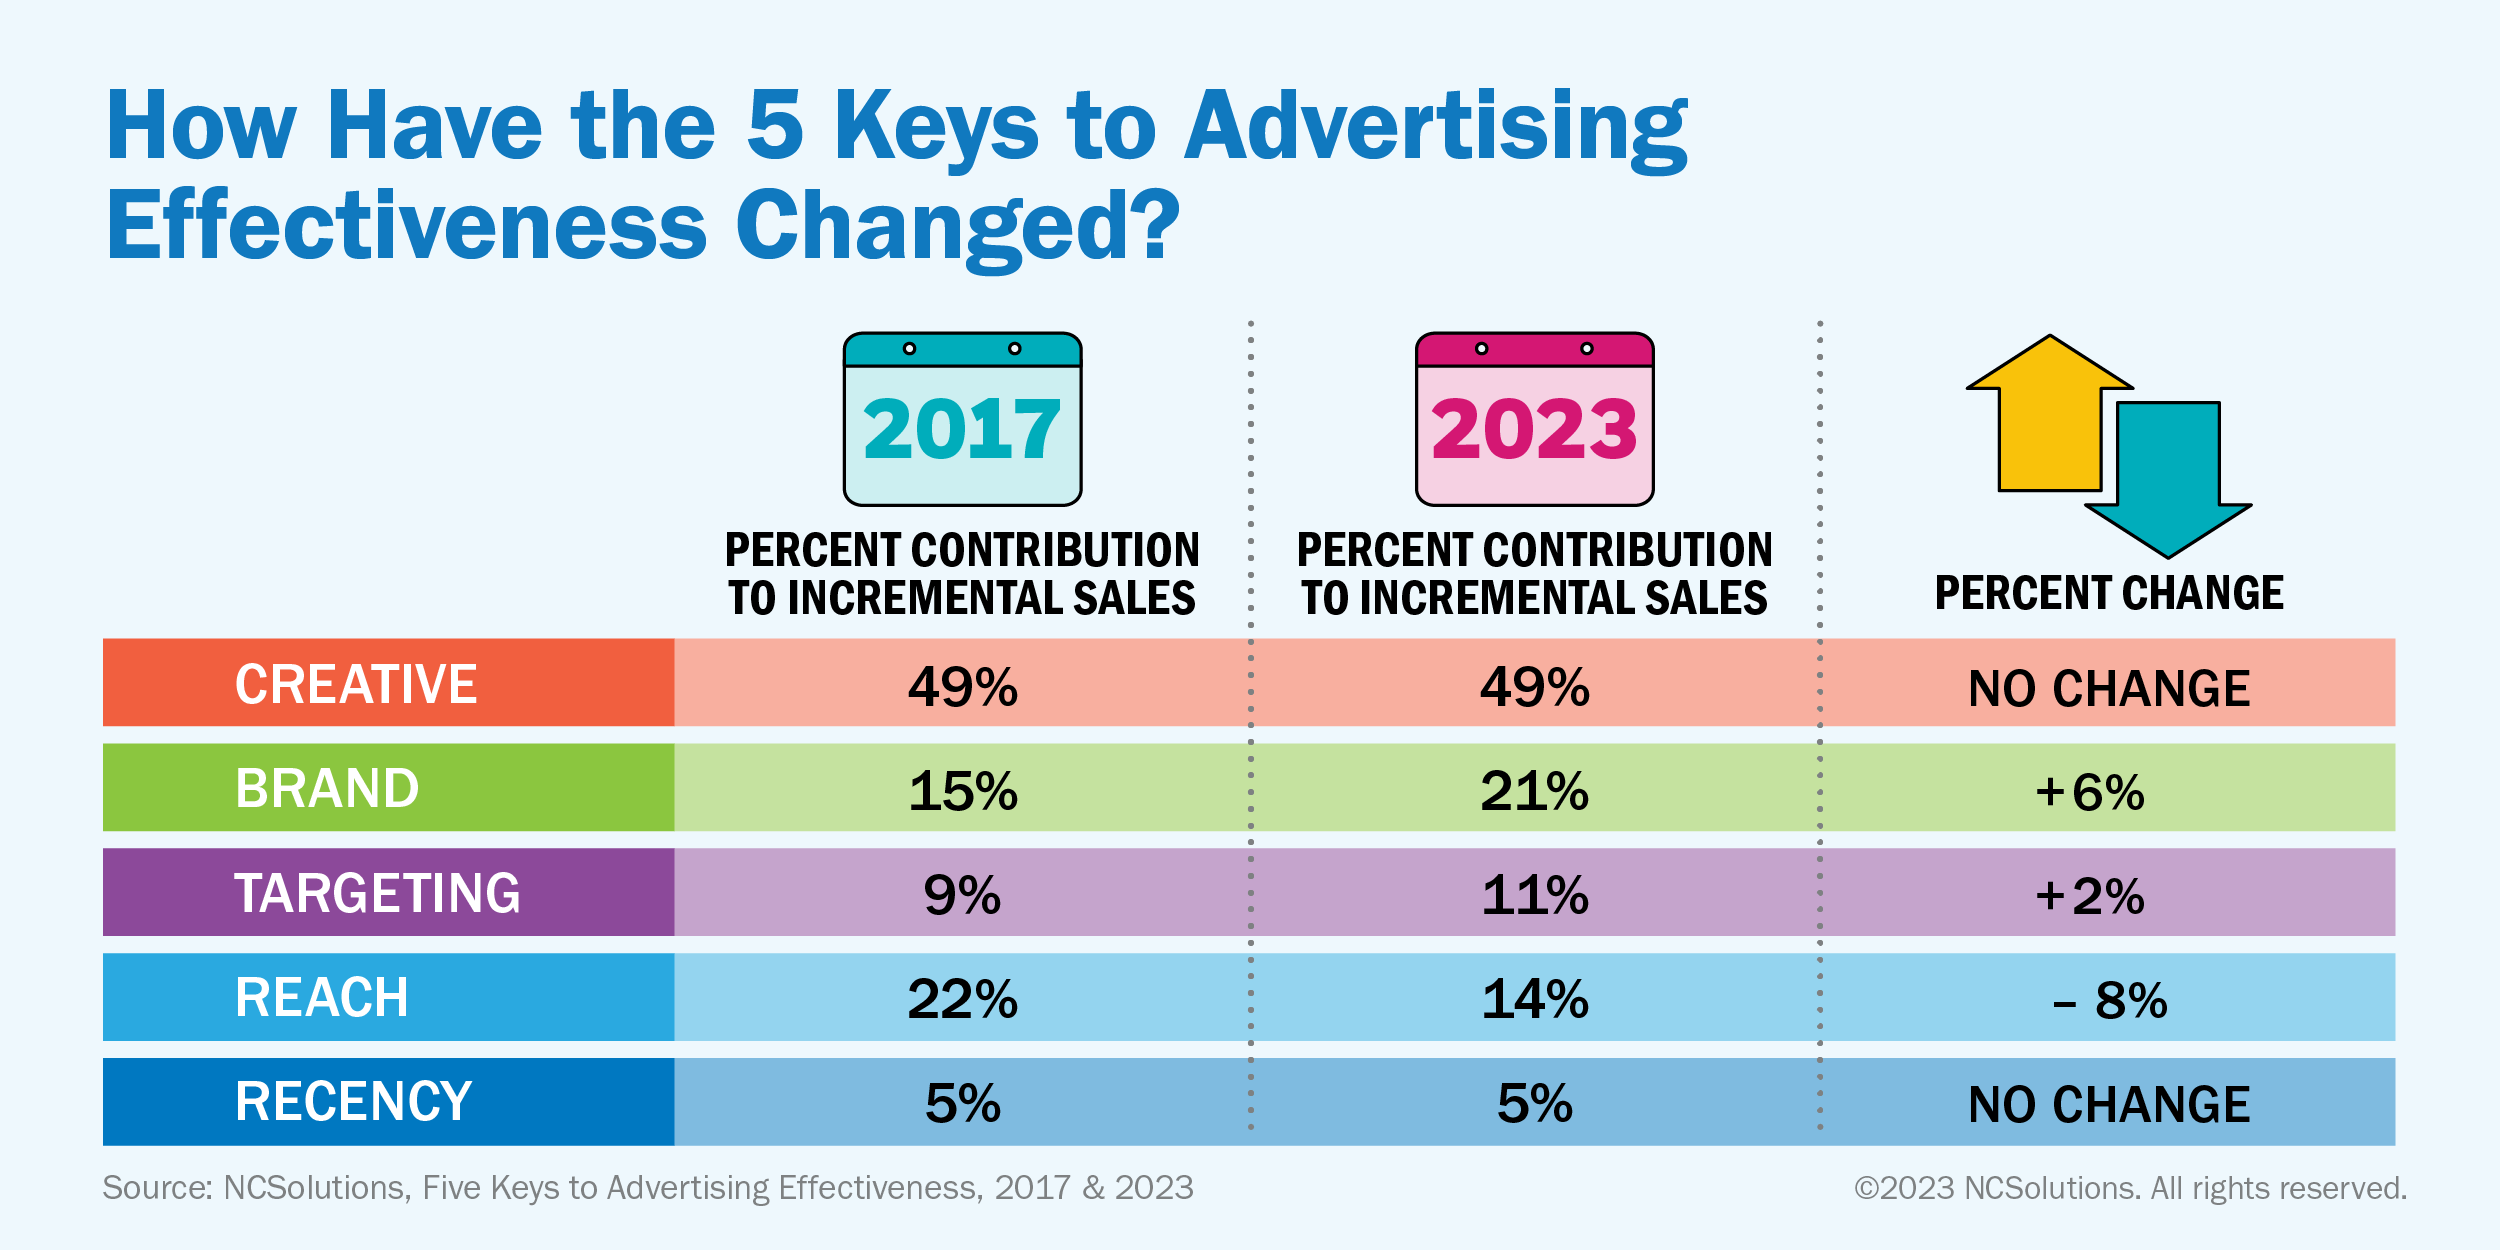 Breakdown of how the 5 keys to advertising effectiveness changed from 2017 to 2023.